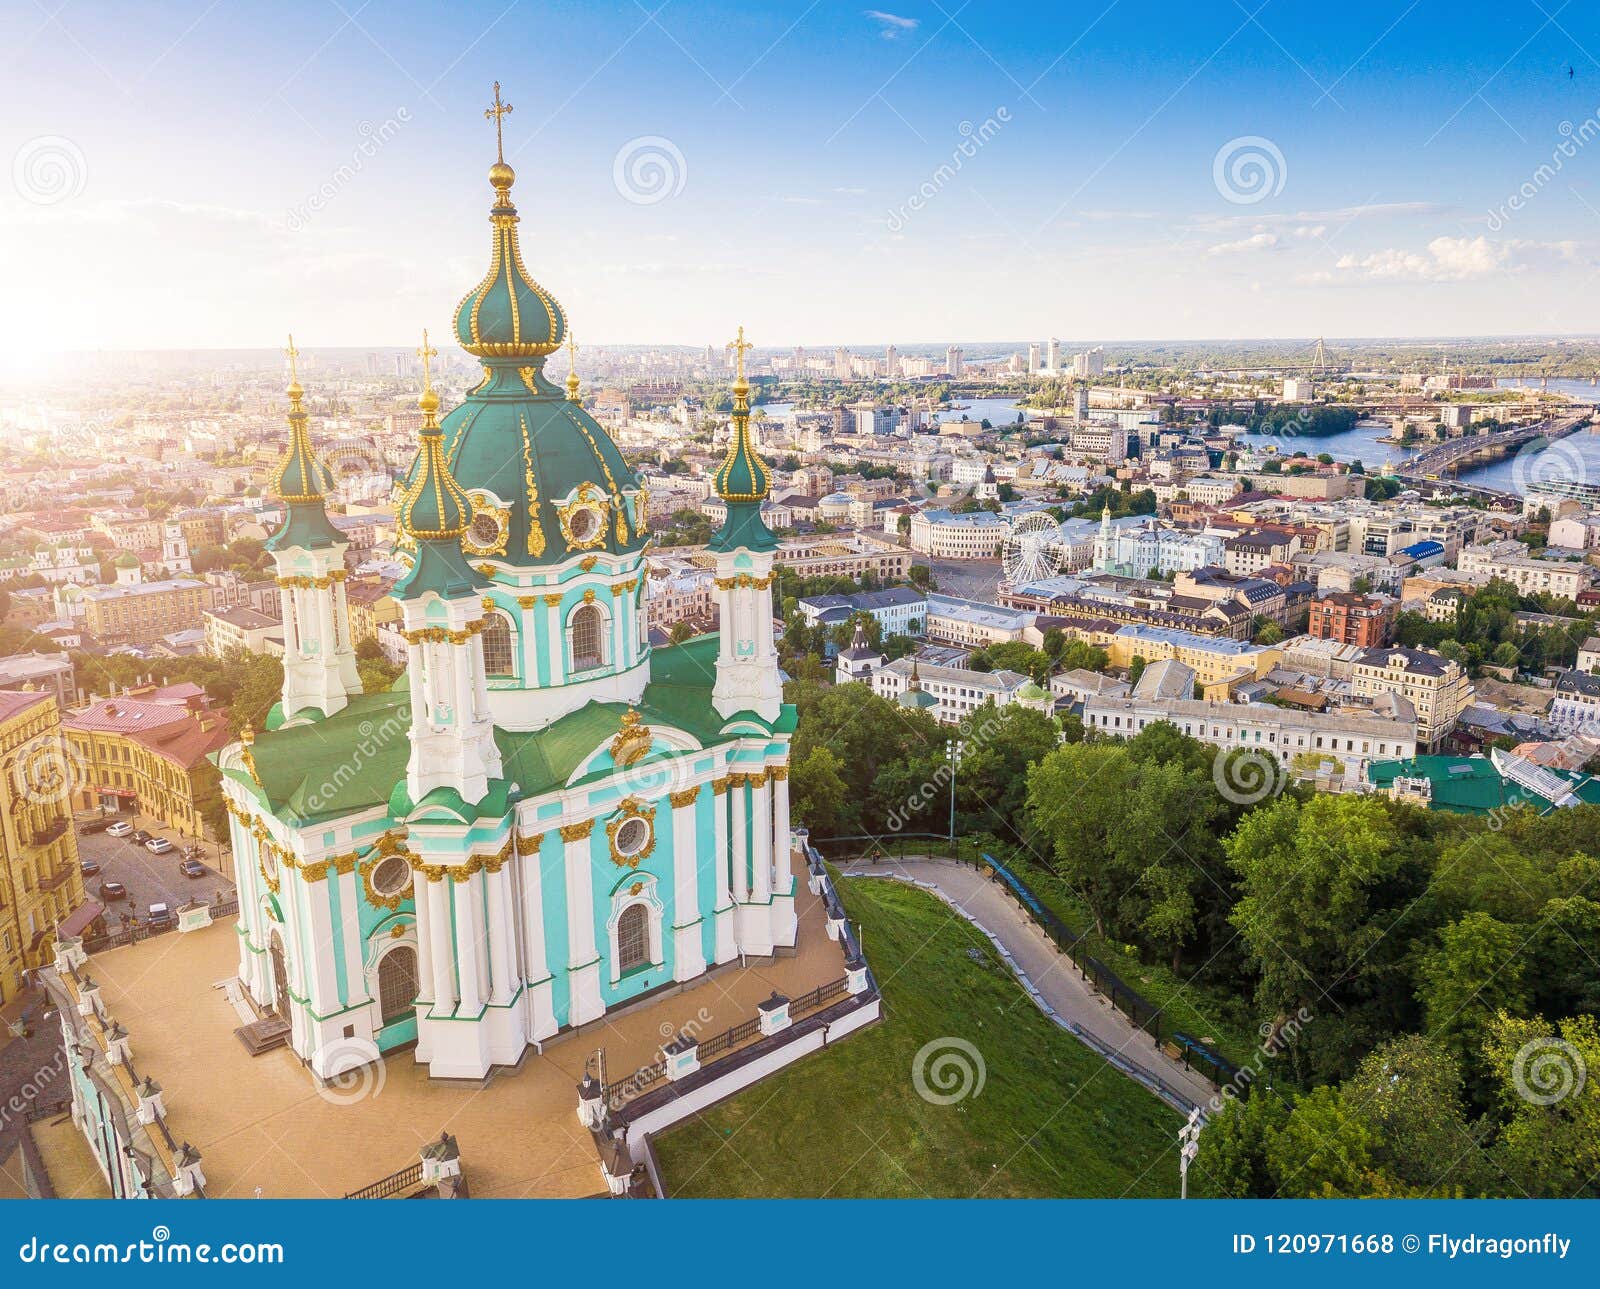 kiev ukraine st andrew`s church . view from above. aerial photo. kiev attractions.